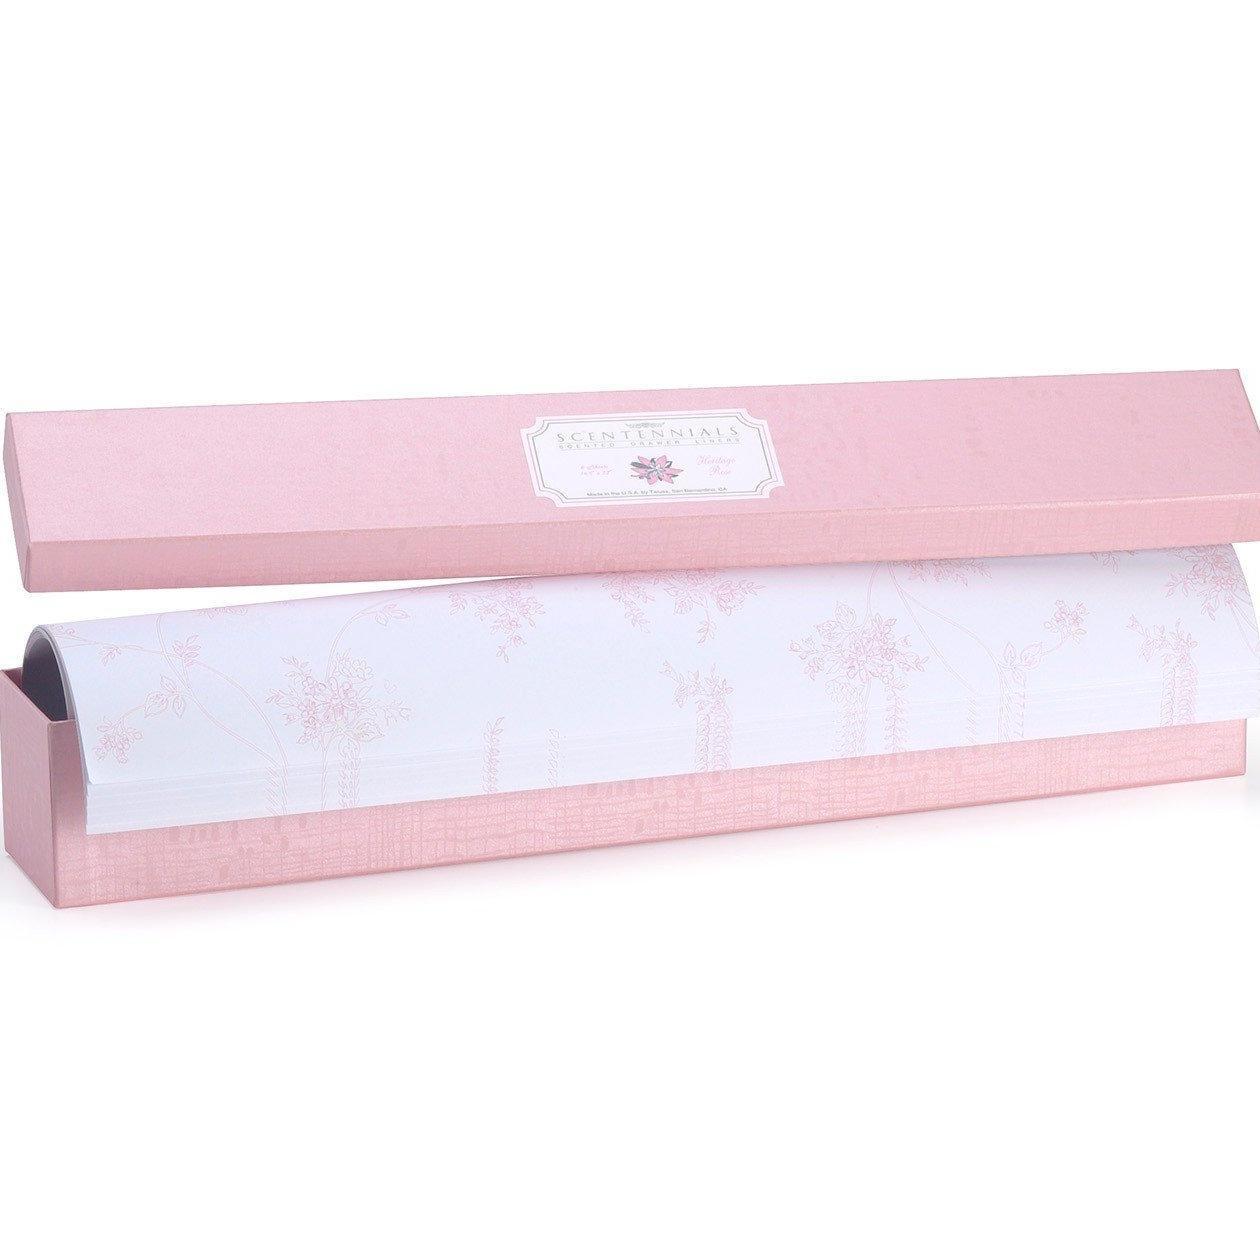 Scentennials Heritage Rose Scented Drawer Liners (6 Sheets)